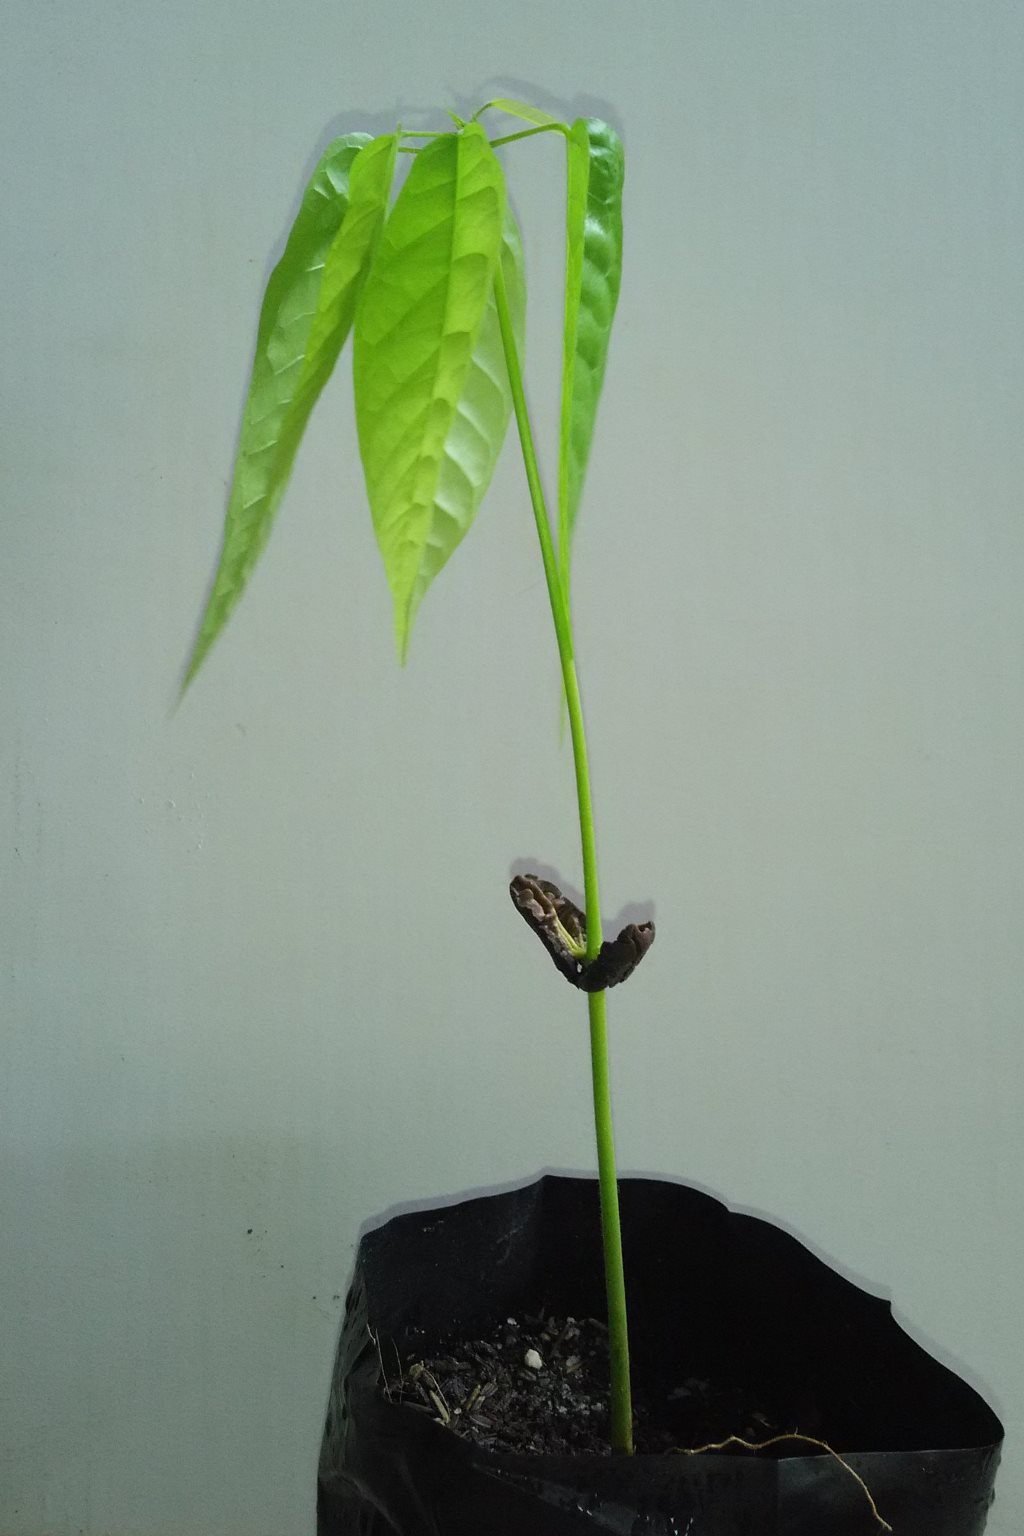 Cocoa - Theobroma Cacao - Cacao plant 3 weeks old